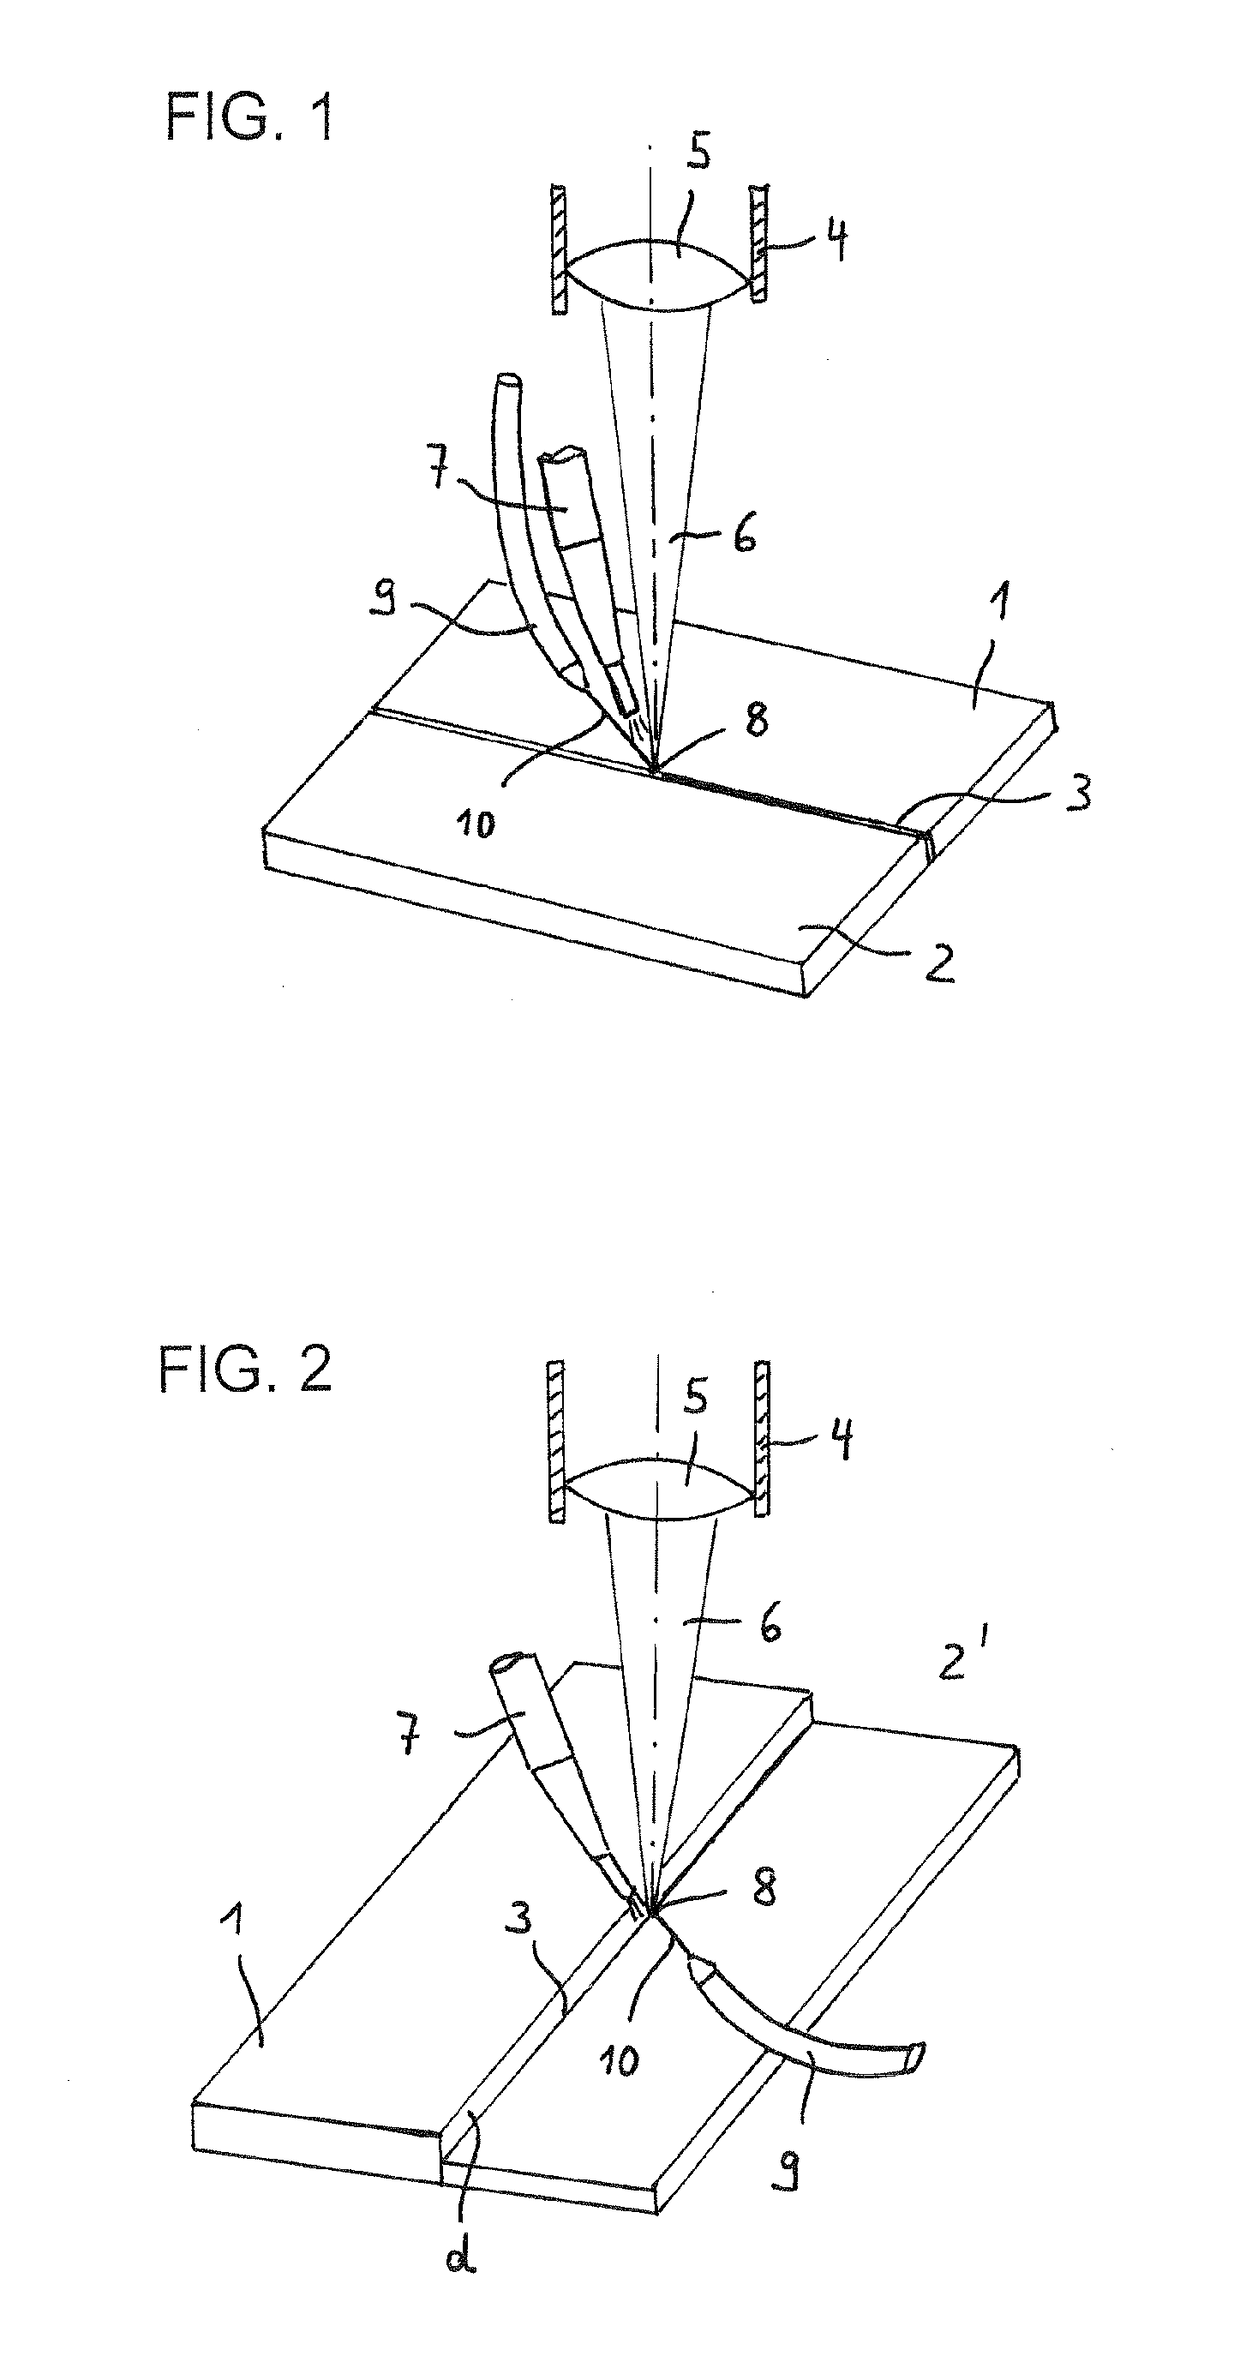 Method for laser welding one or more workpieces of hardenable steel in a butt joint